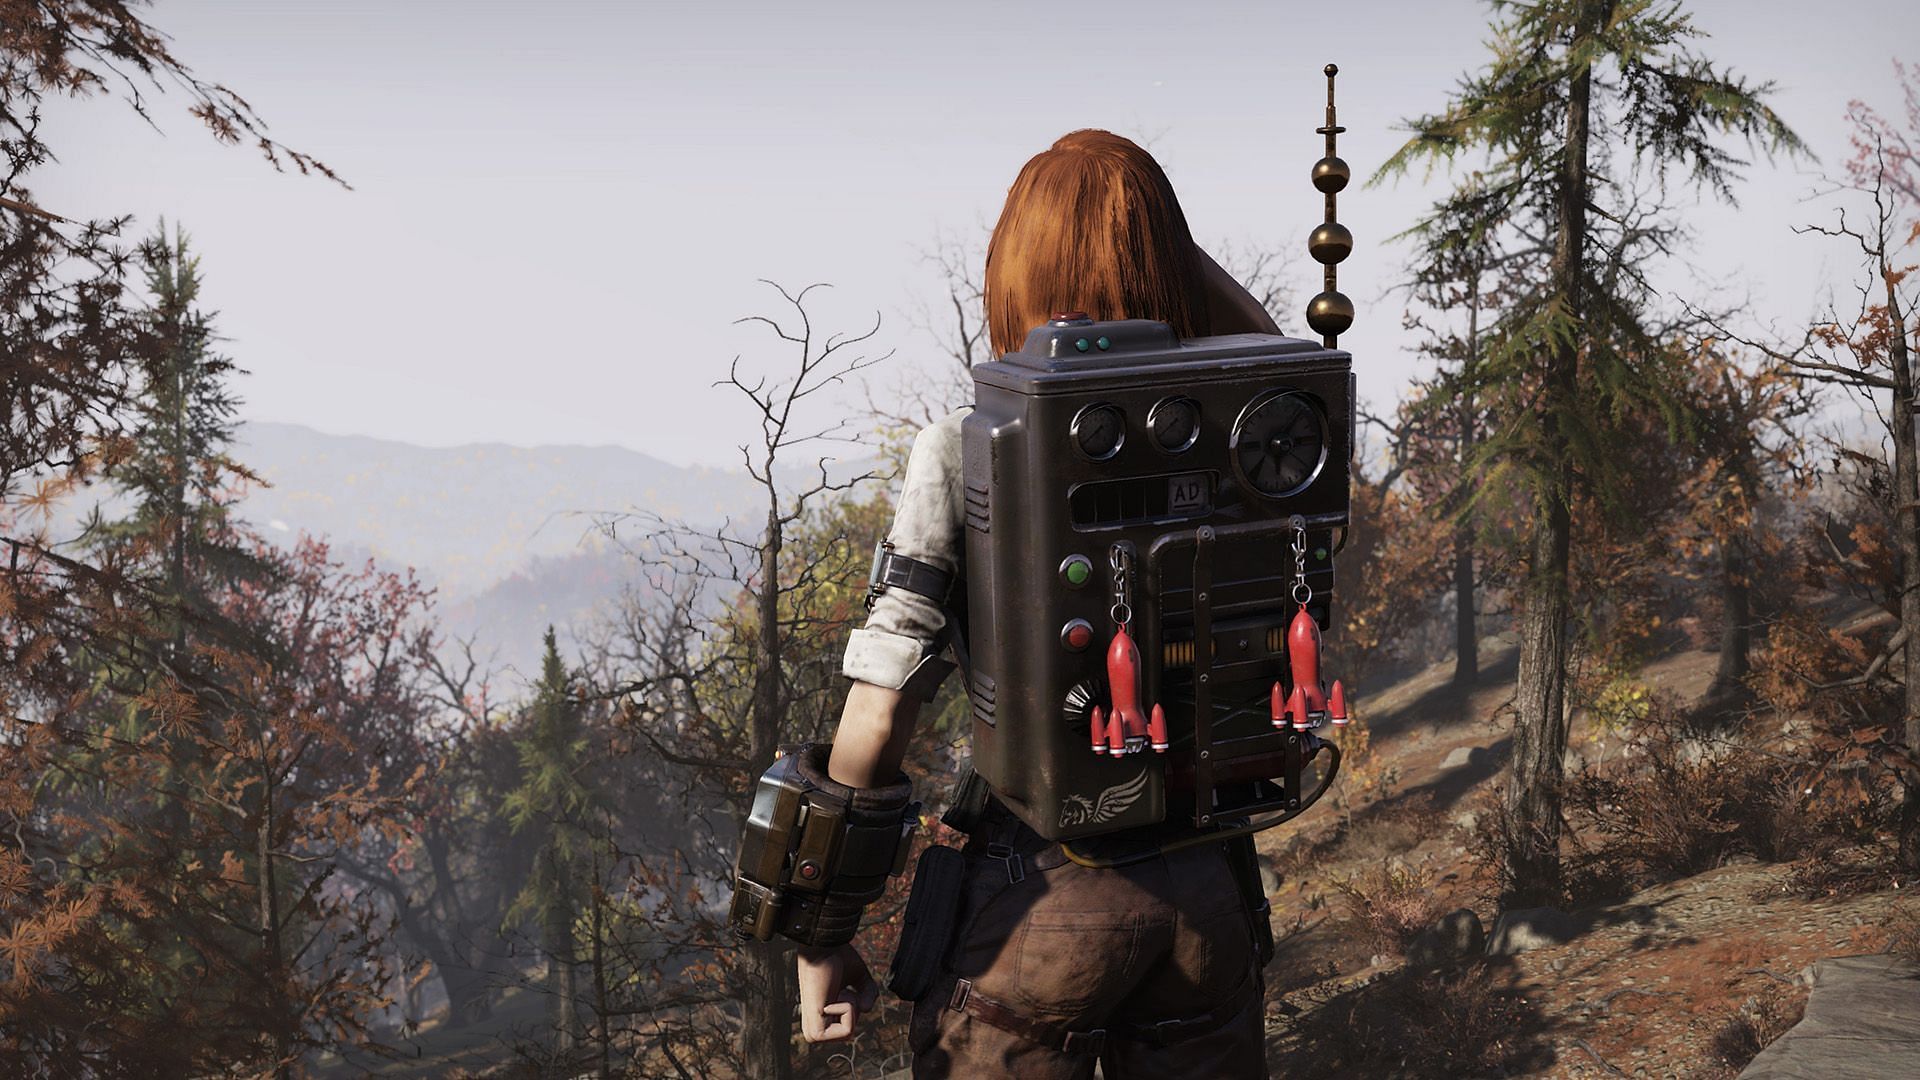 All backpacks in Fallout 76